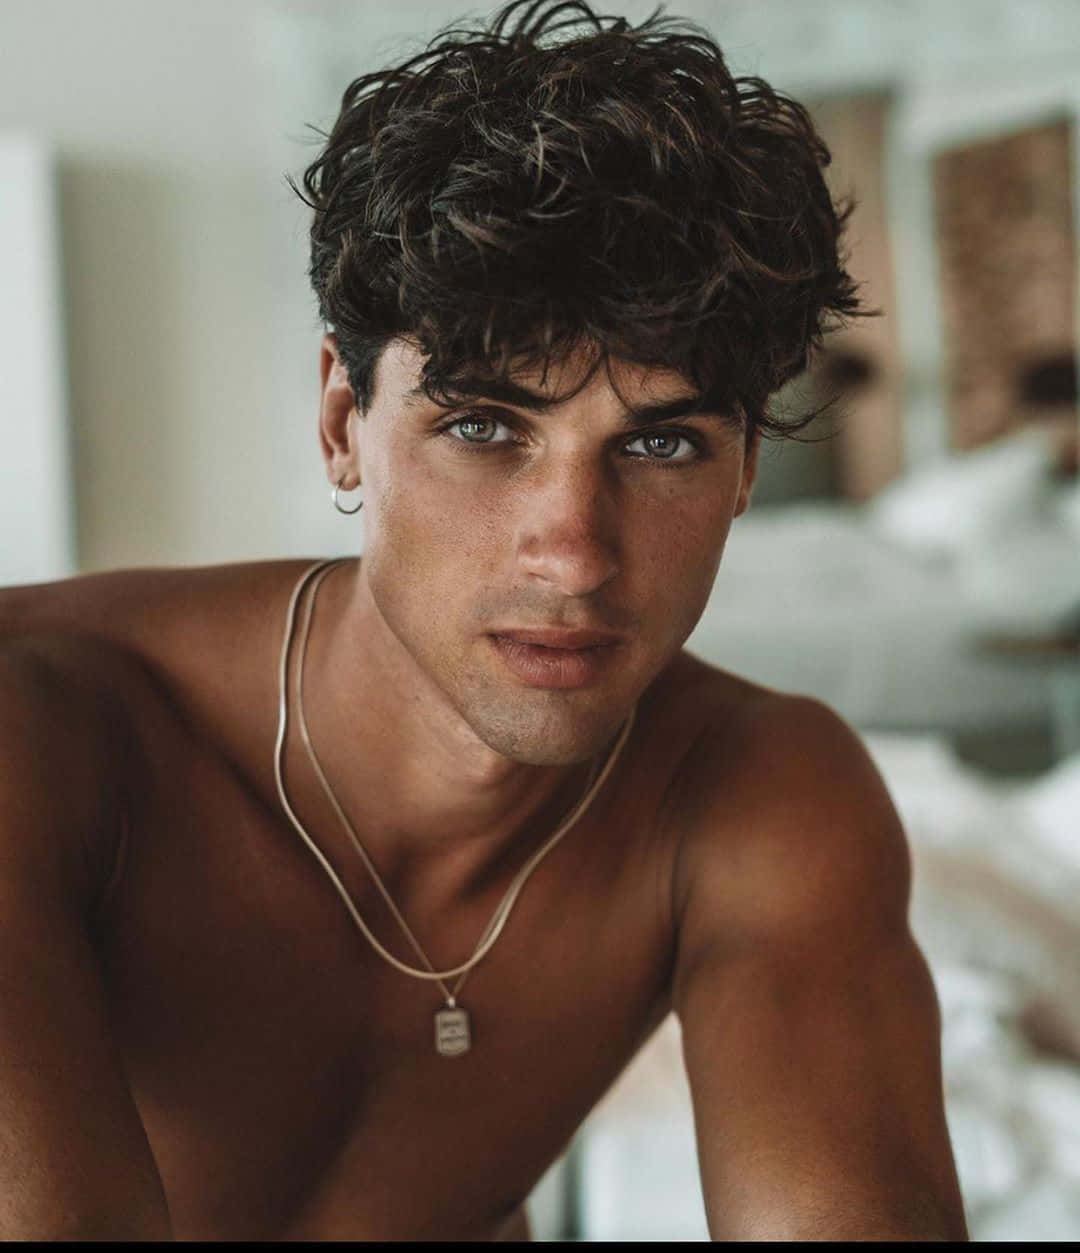 A Shirtless Man With Curly Hair Posing For A Photo